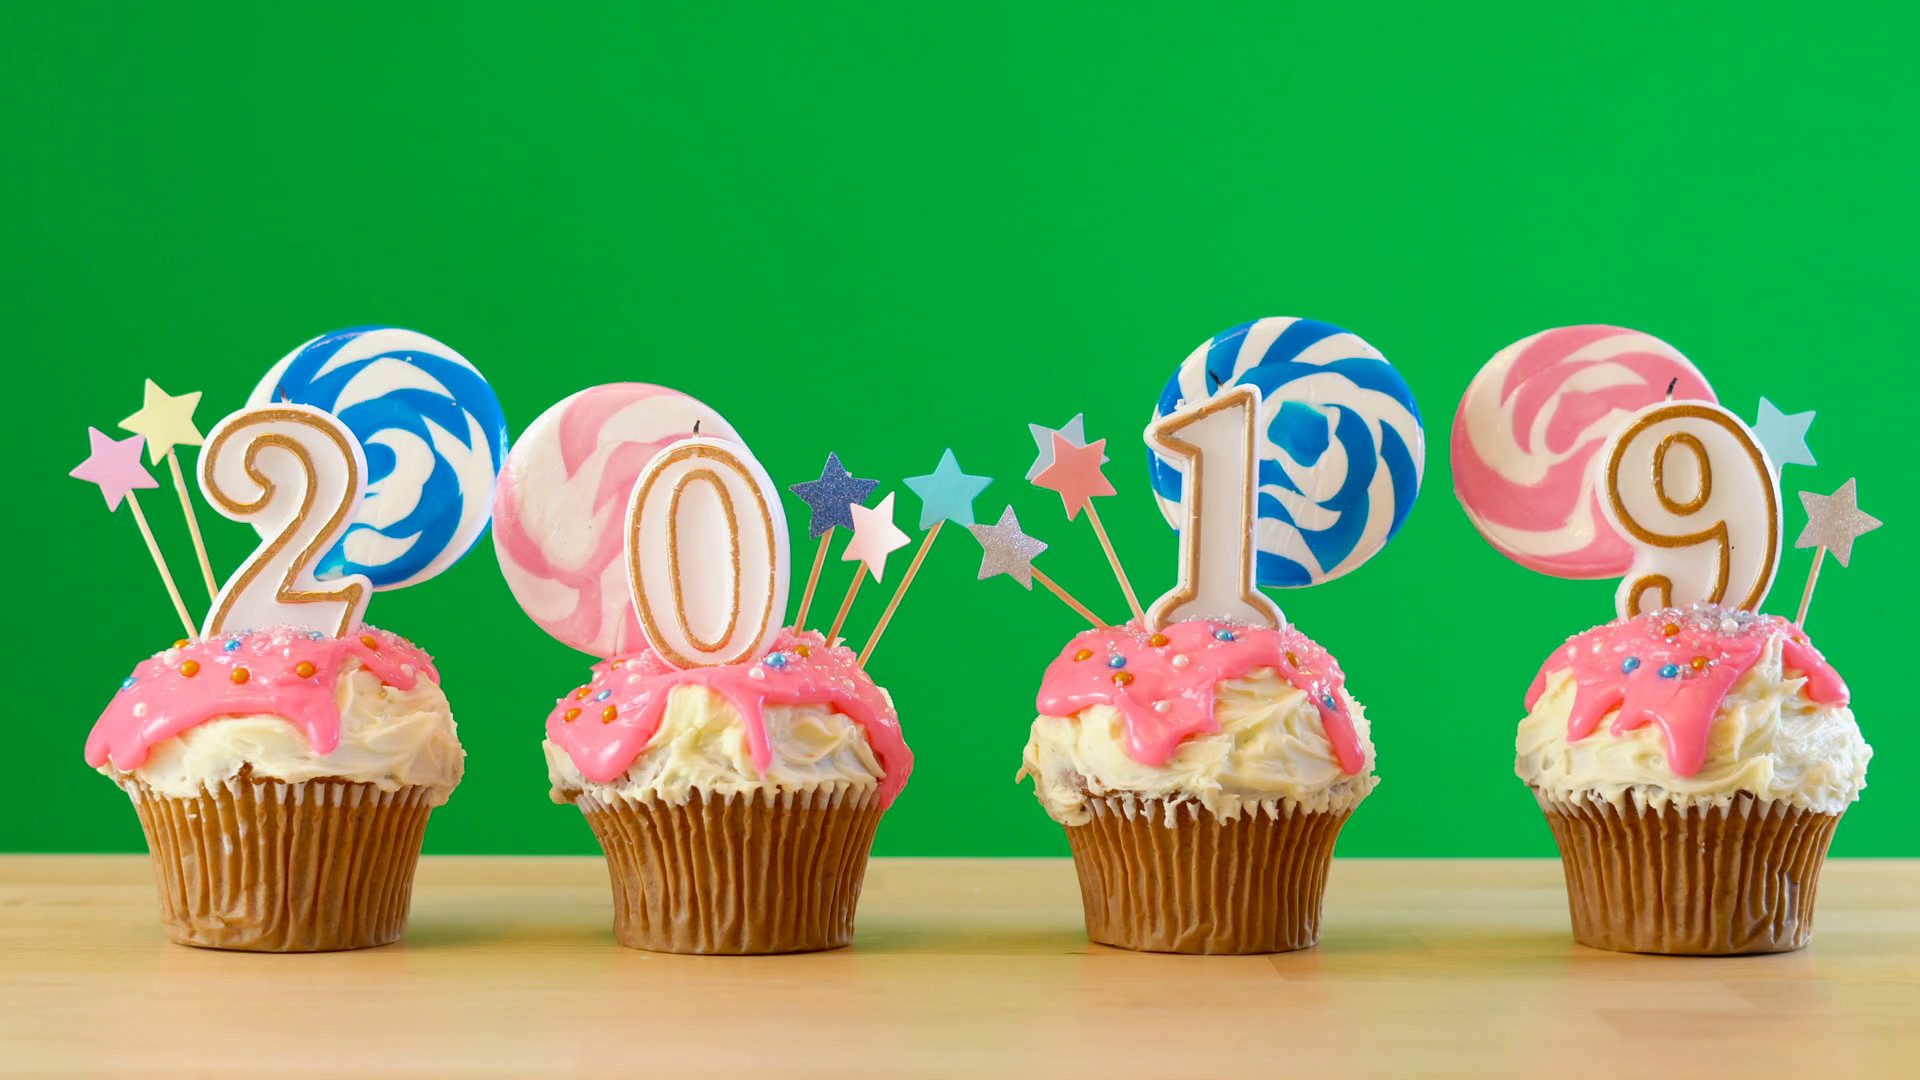 1920x1080 2019 Happy New Year candy land lollipop cupcakes on greenscreen. Stock  Video Footage - Storyblocks Video